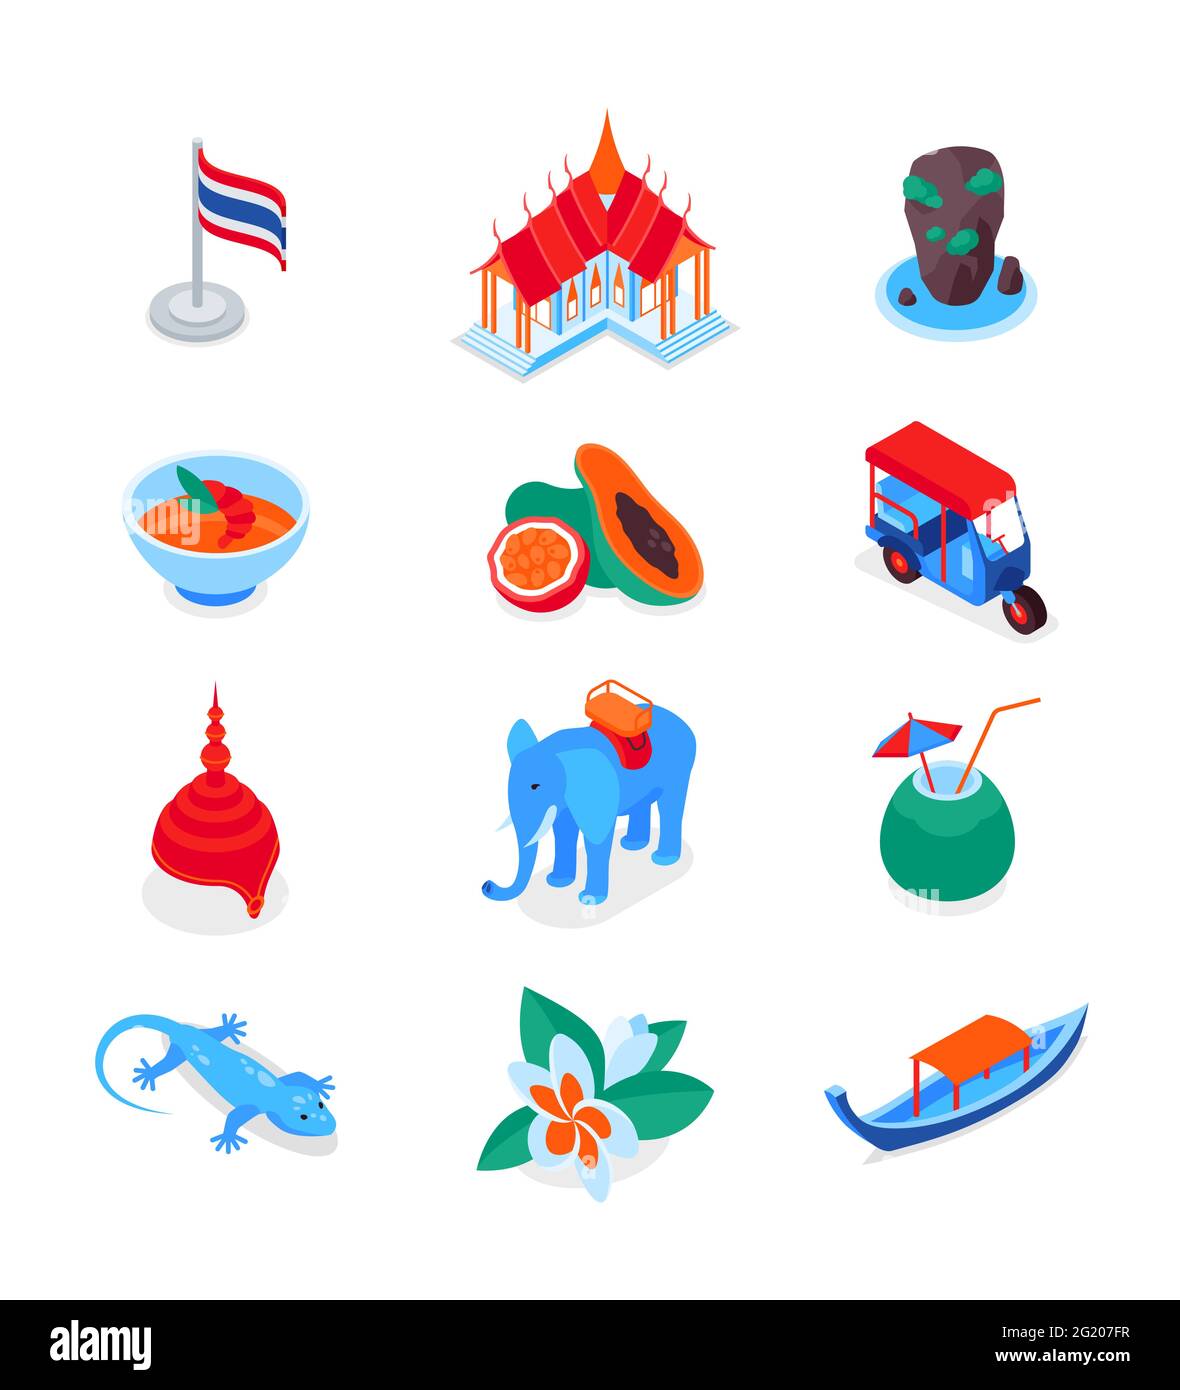 Thai symbols - modern colorful isometric icons set. Culture, cuisine and traditions of Thailand. Tuk-tuk, elephant, long-tail boat, tom yum, lotus, kh Stock Vector